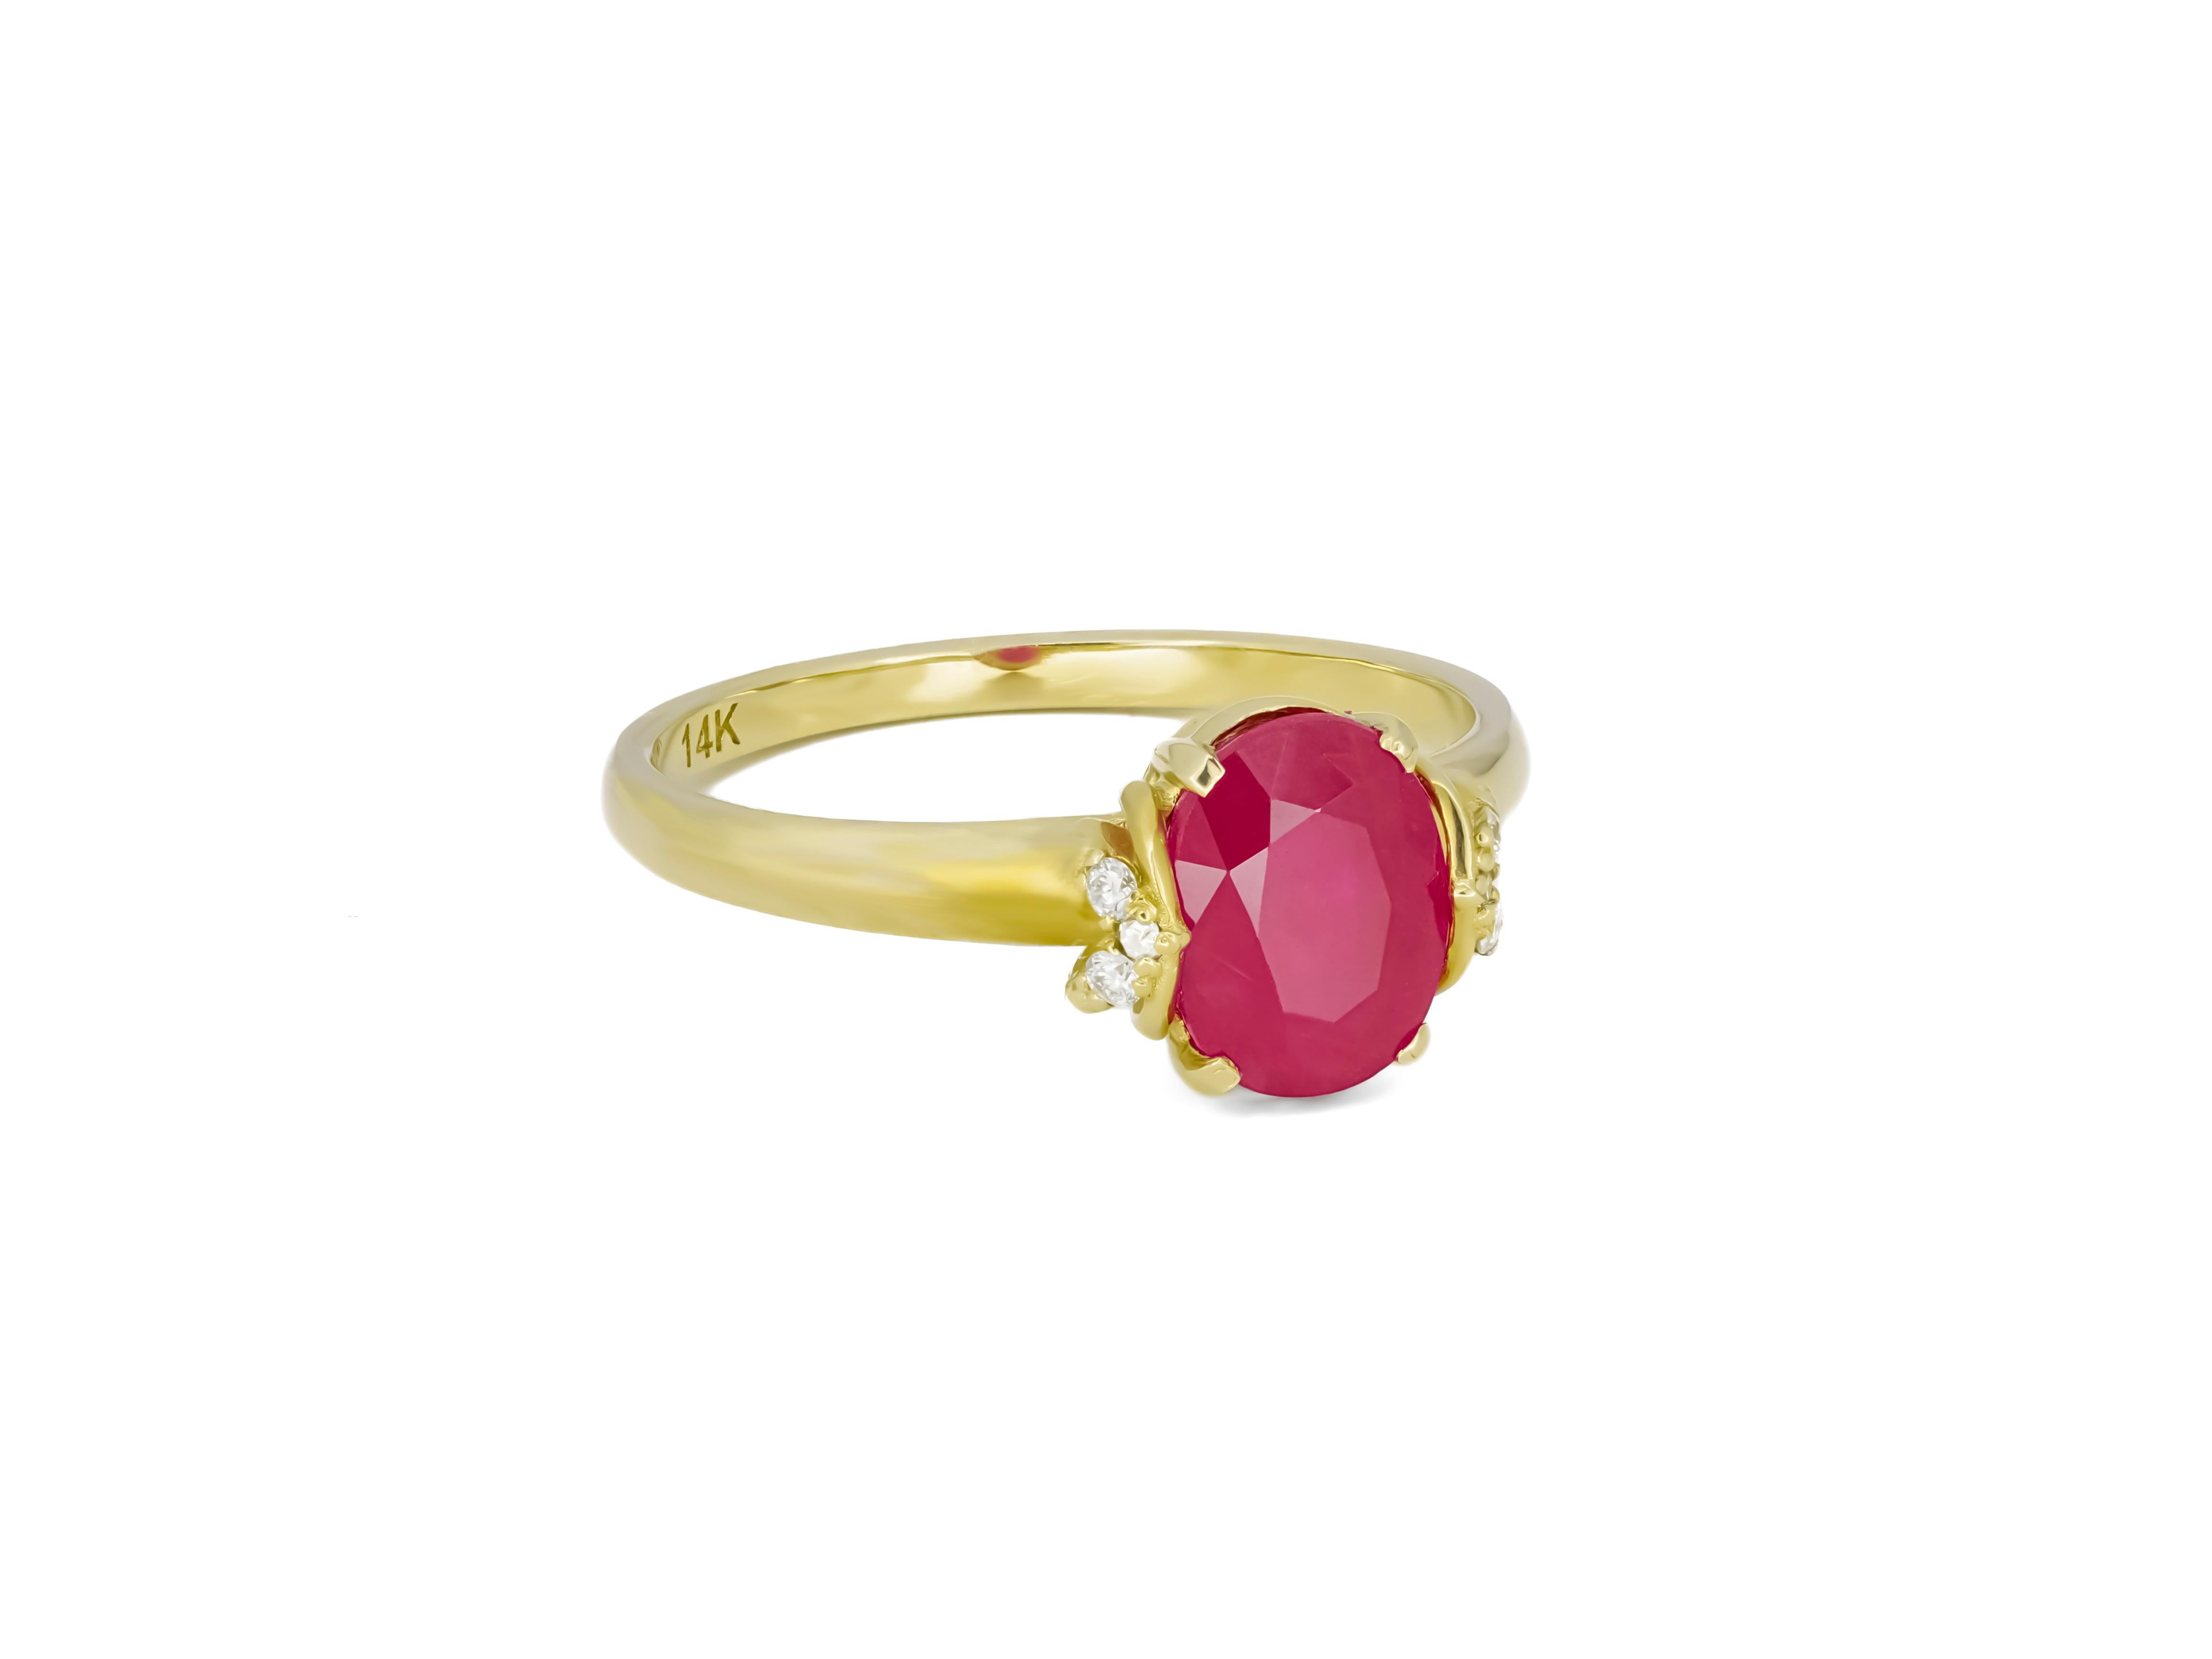 14 Karat Gold Ring with Ruby and Diamonds, Oval Ruby Ring 8